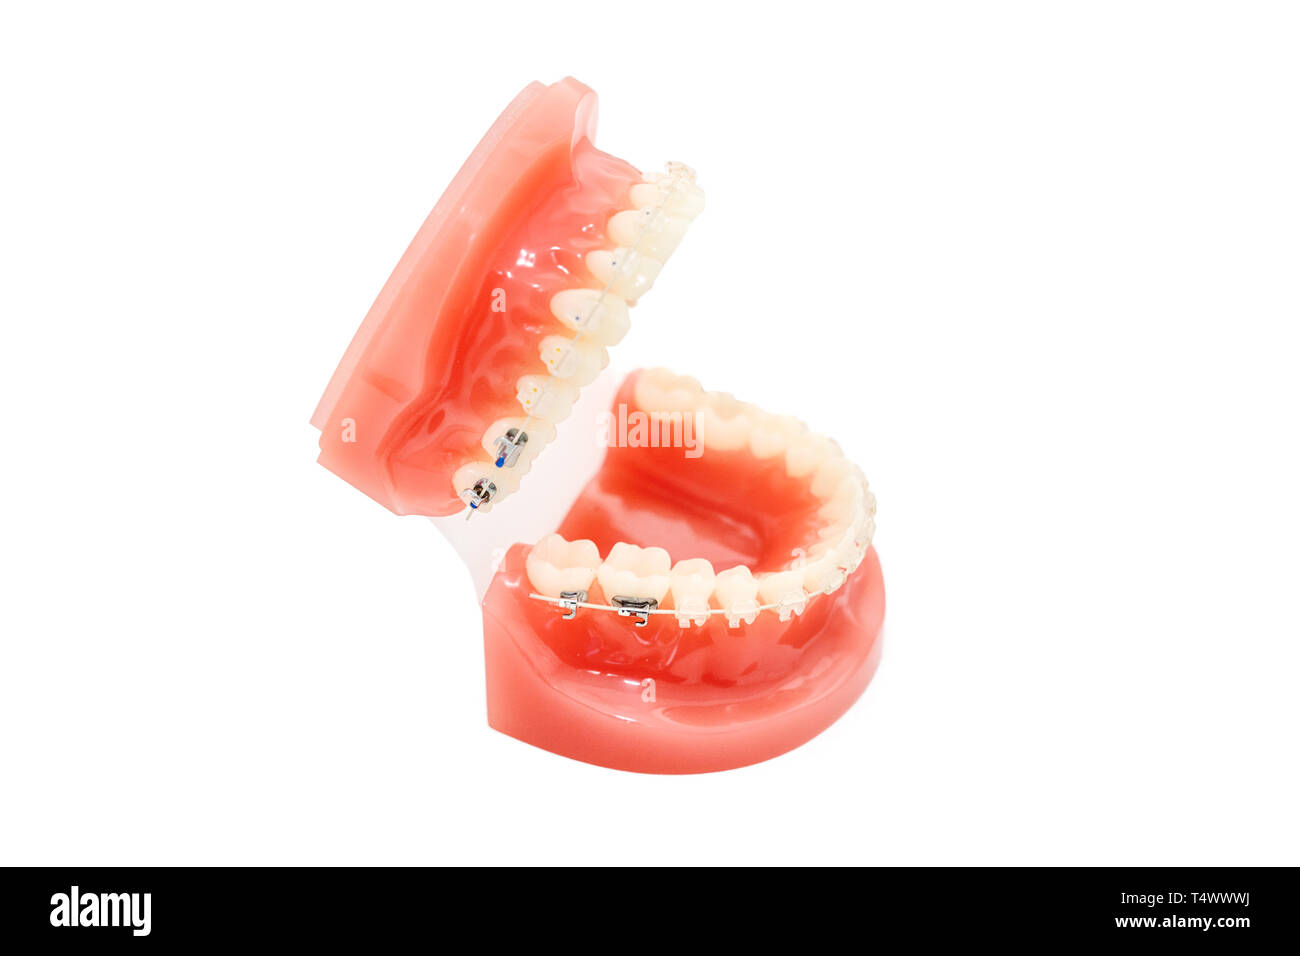 Orthodontic model and dentist tool - demonstration teeth model with ceramic braces on teeth on an artificial jaws closeup Stock Photo